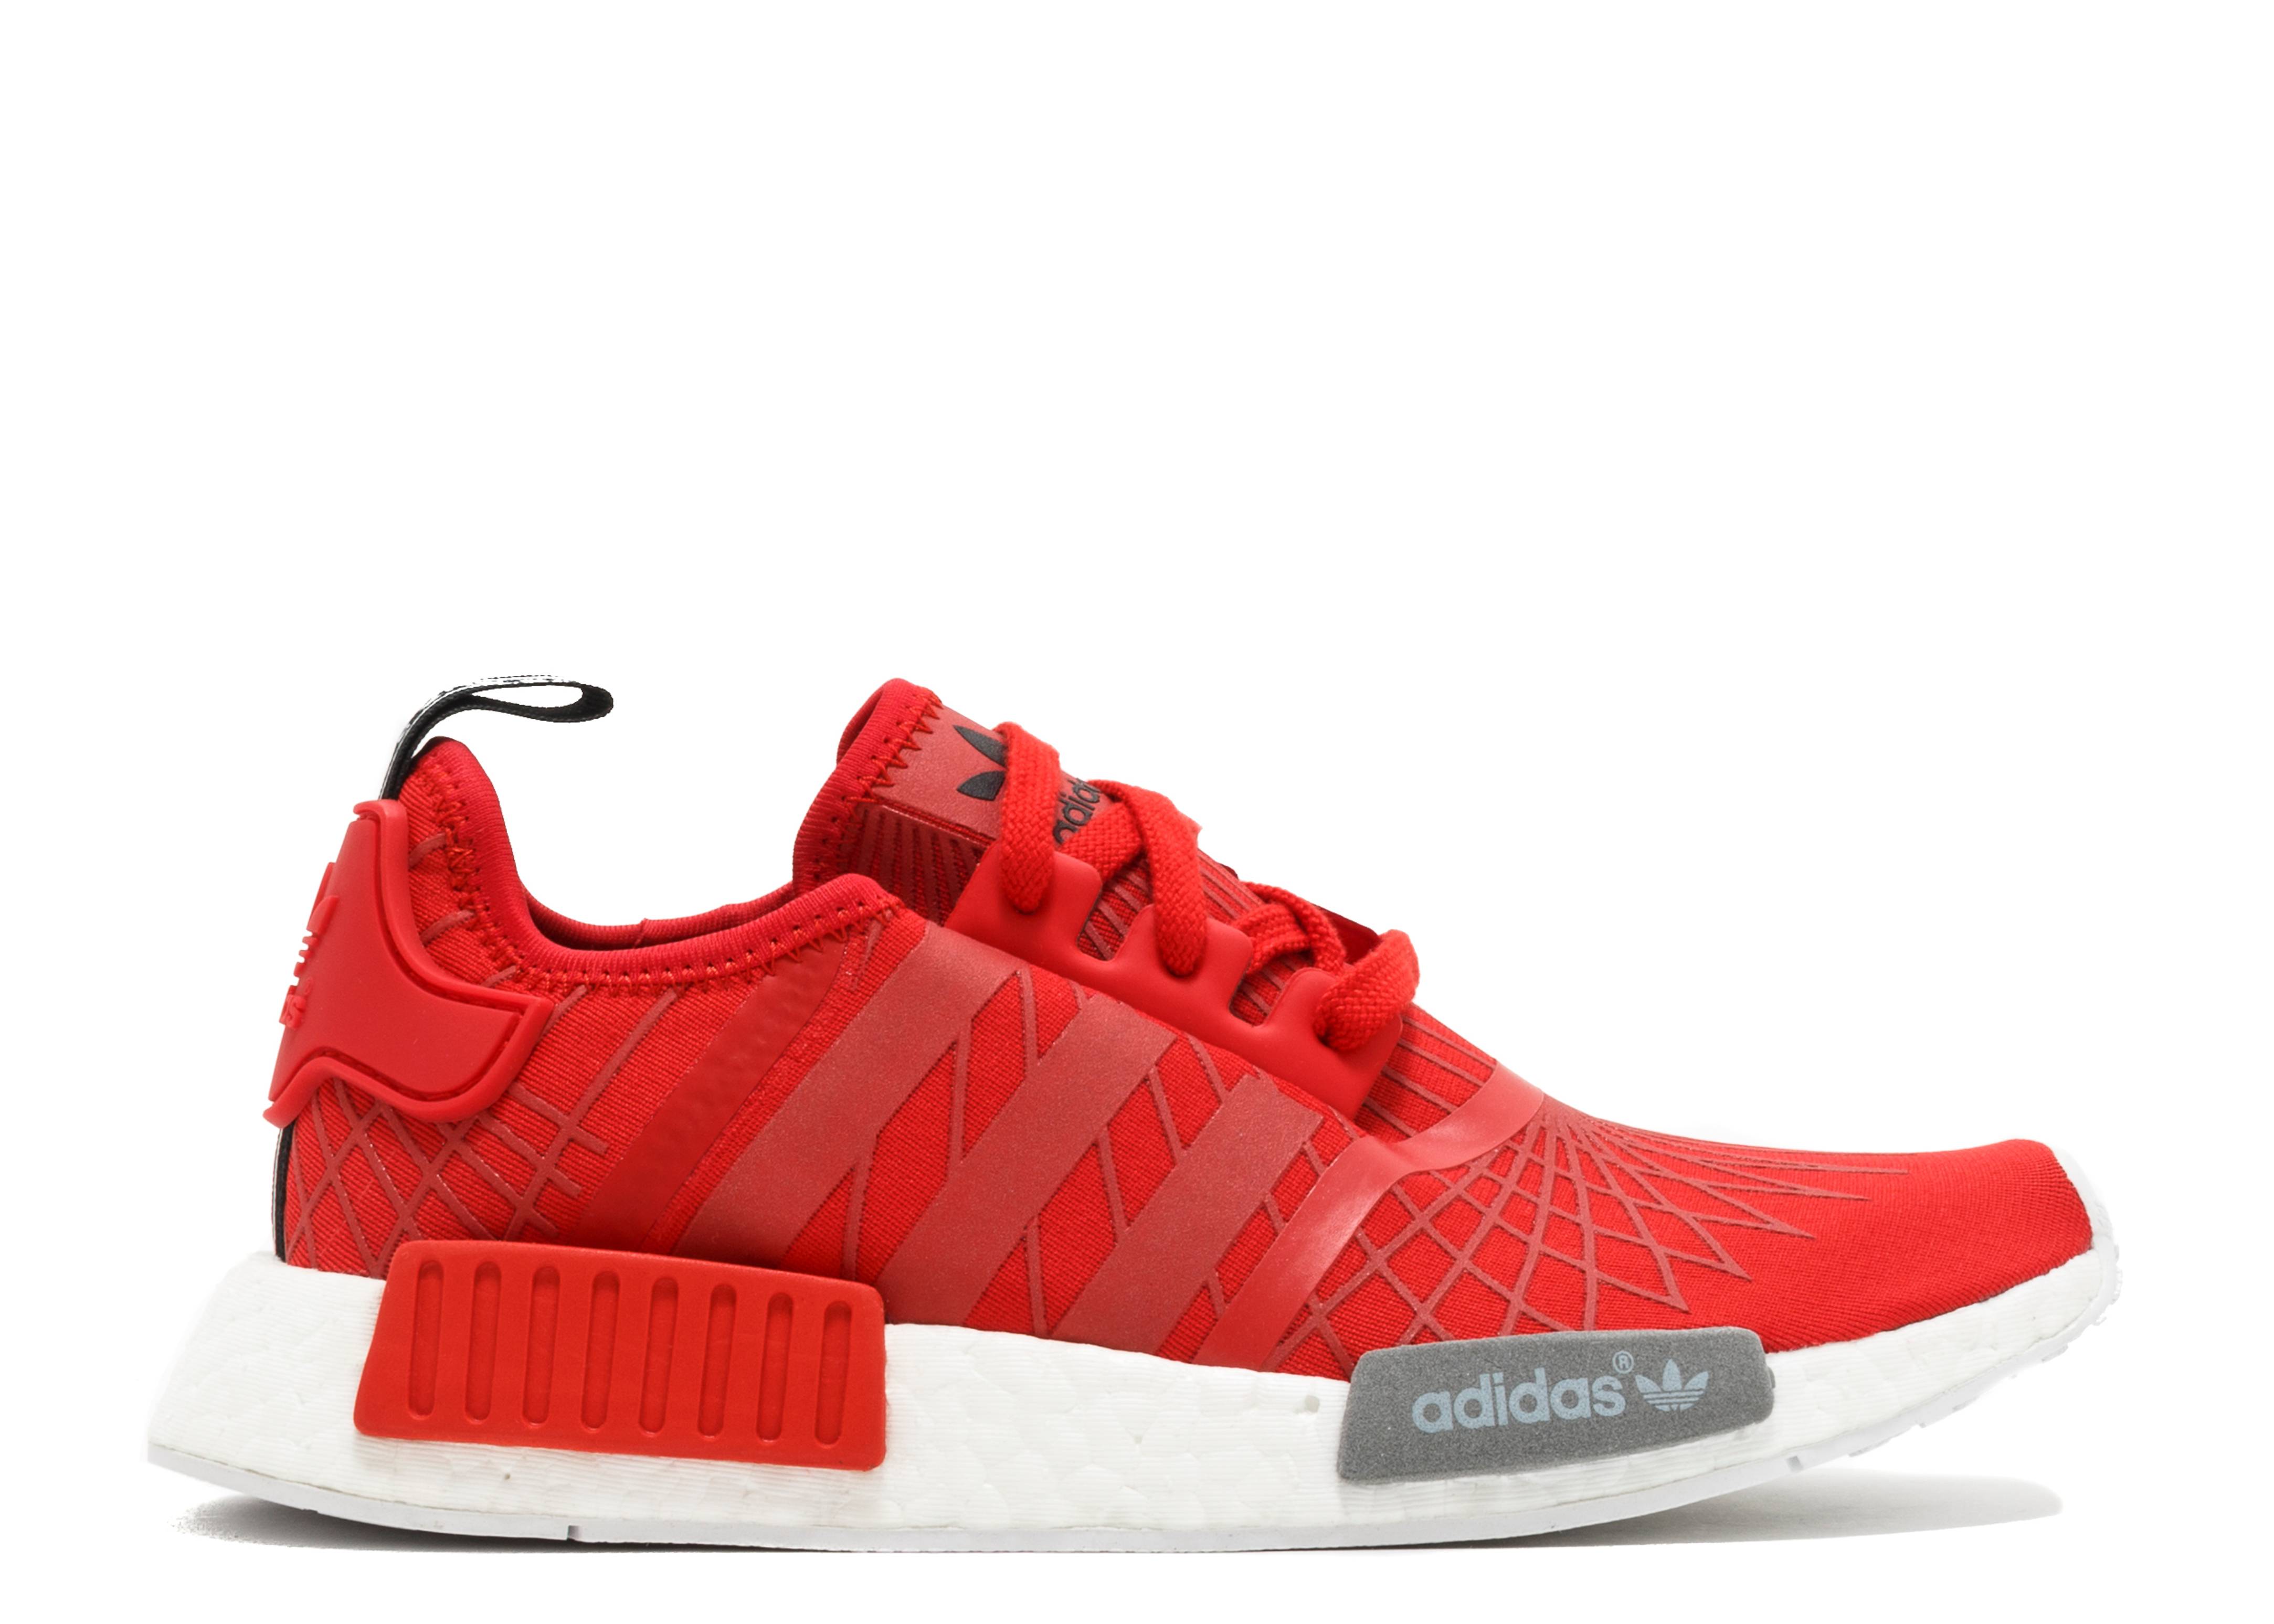 Wmns NMD_R1 'Lush Red'